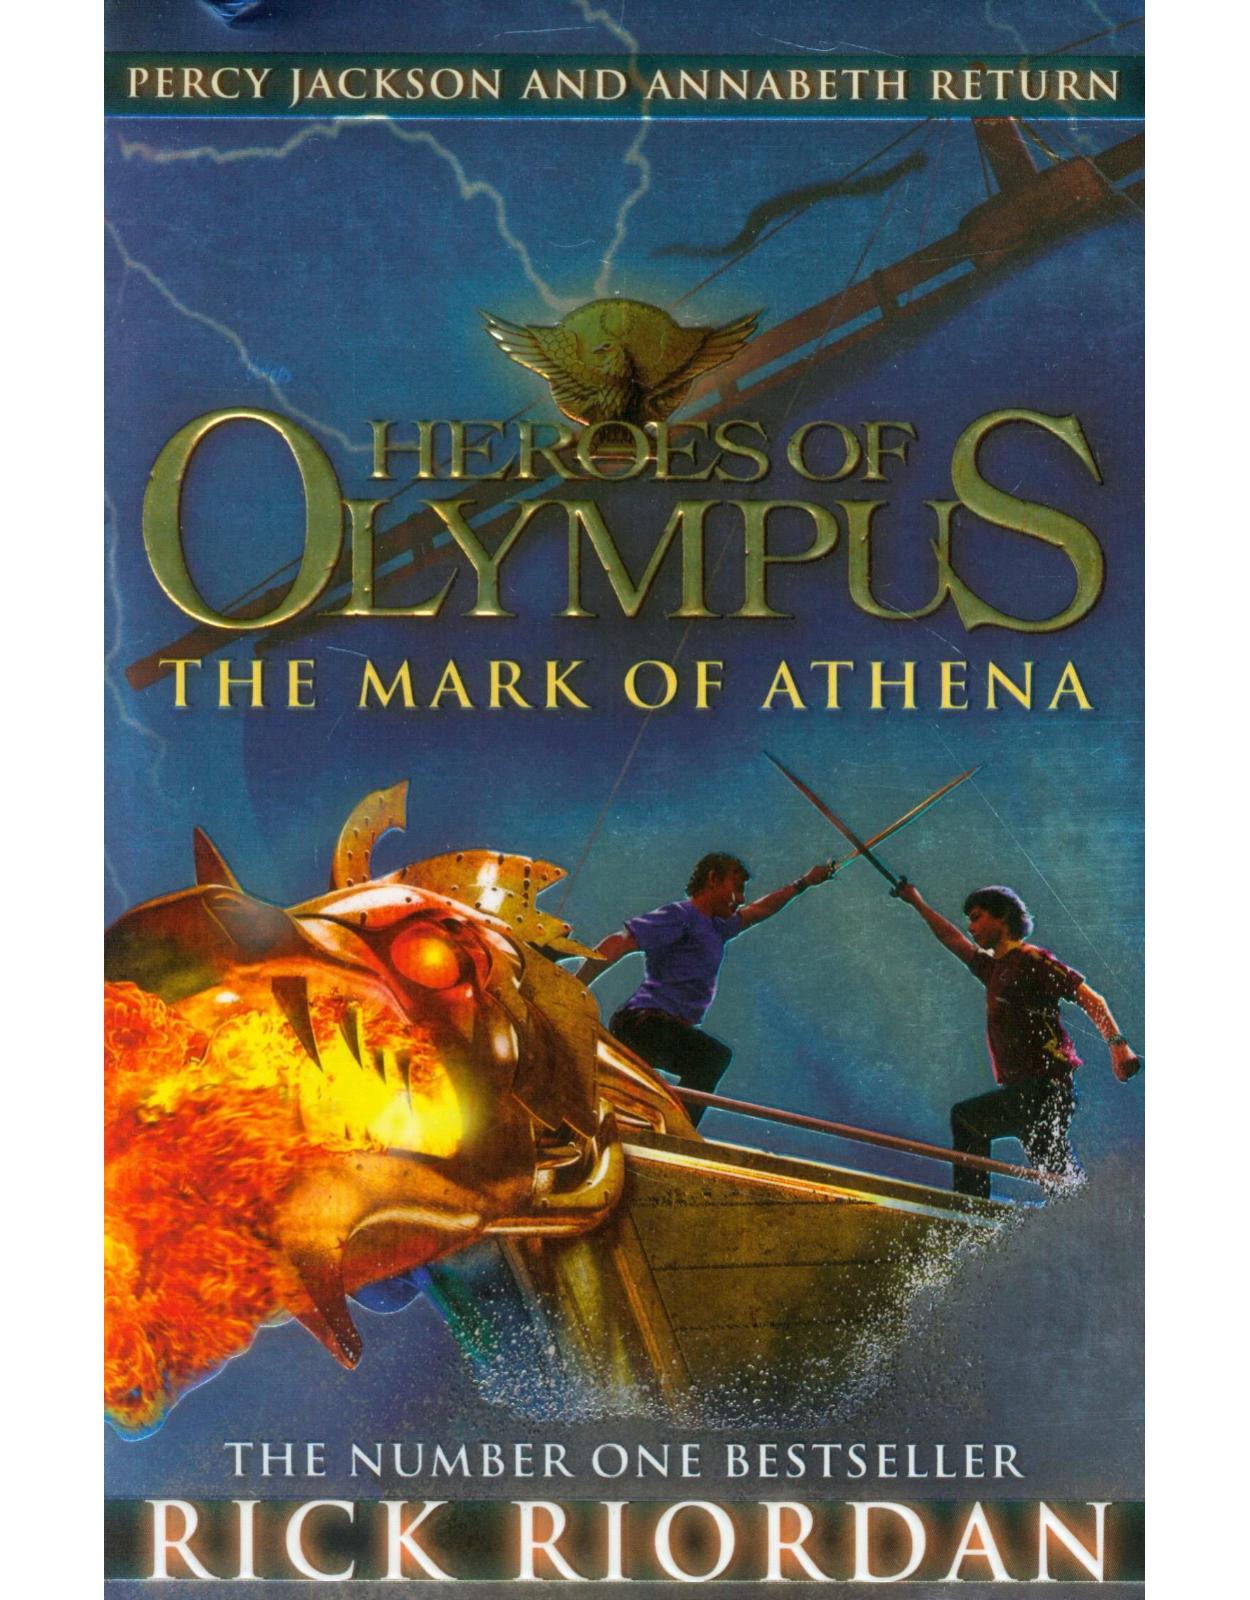 The Mark of Athena: The Heroes of Olympus, Book 3